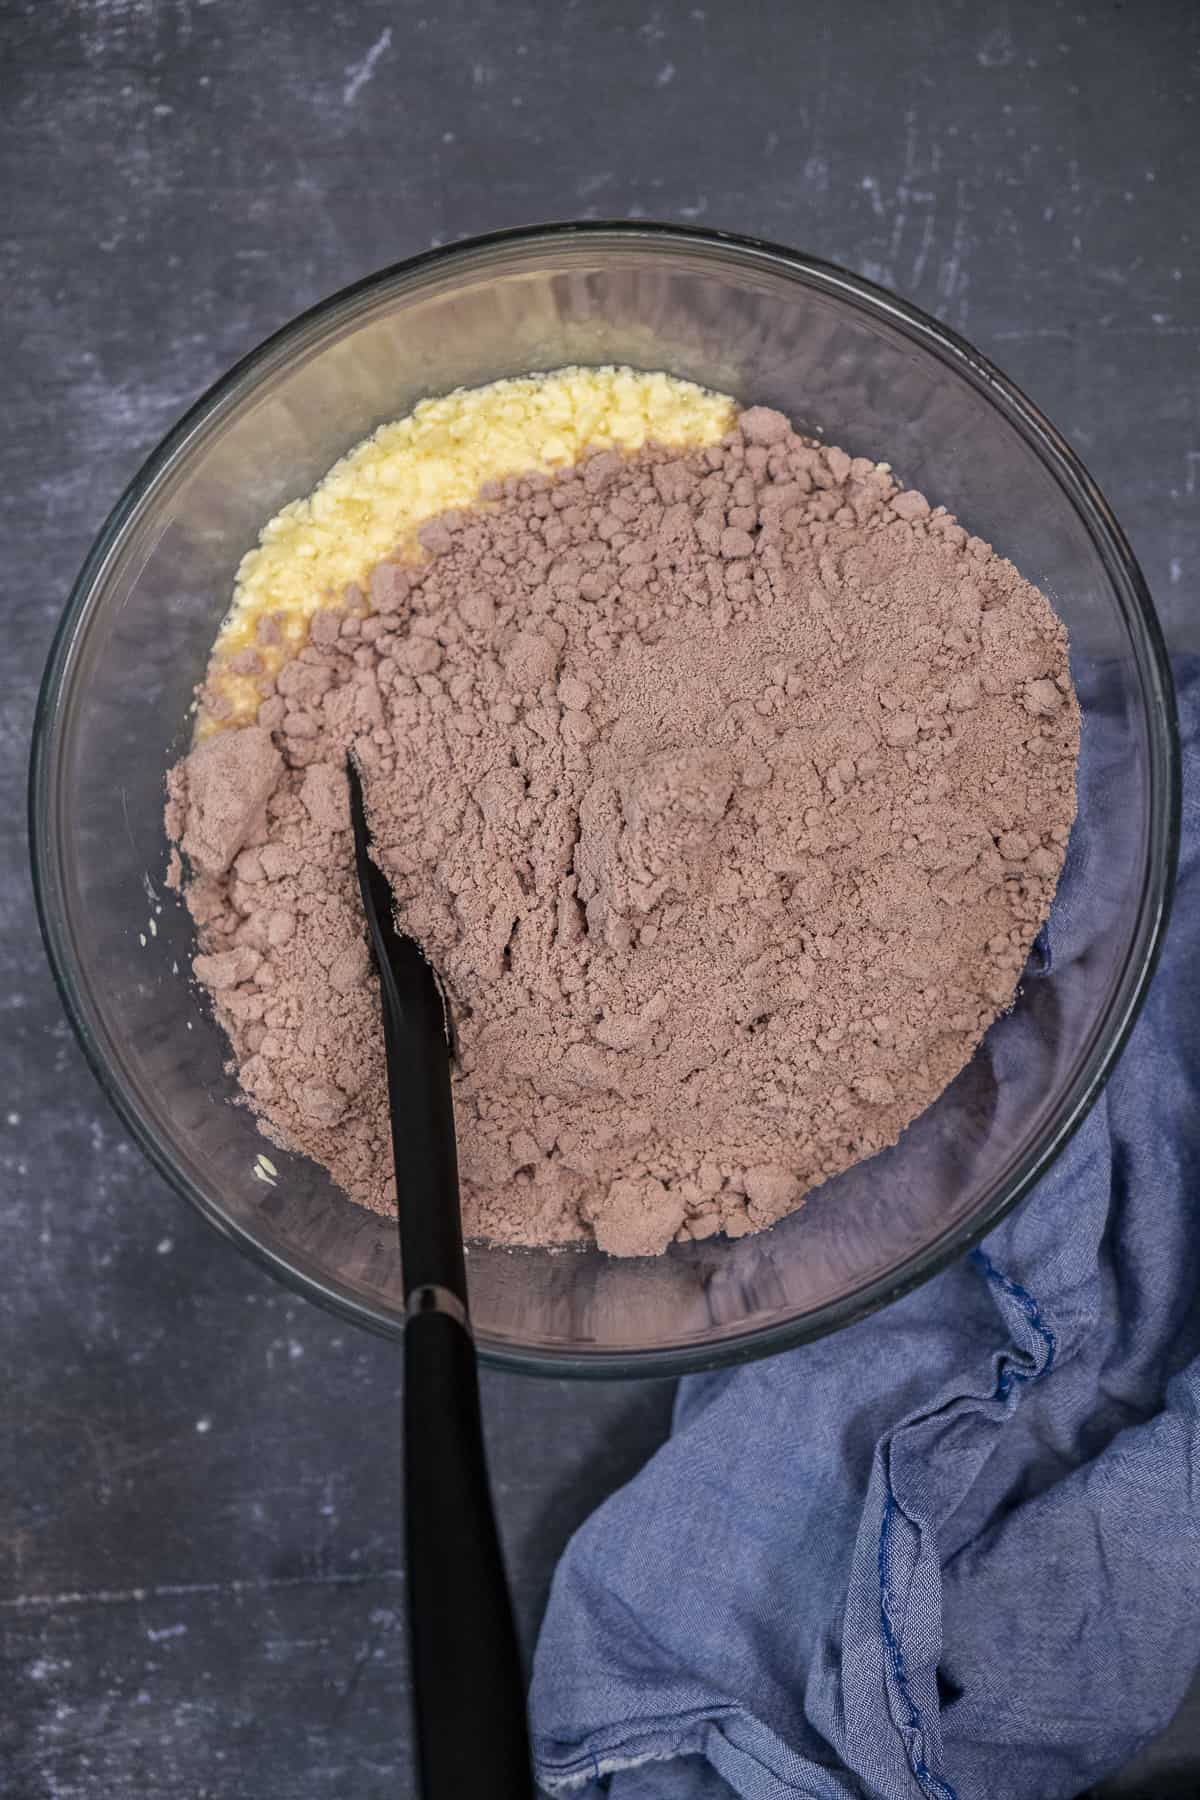 Red velvet cake mix and egg and butter mixture in a glass mixing bowl and a black spatula inside it.